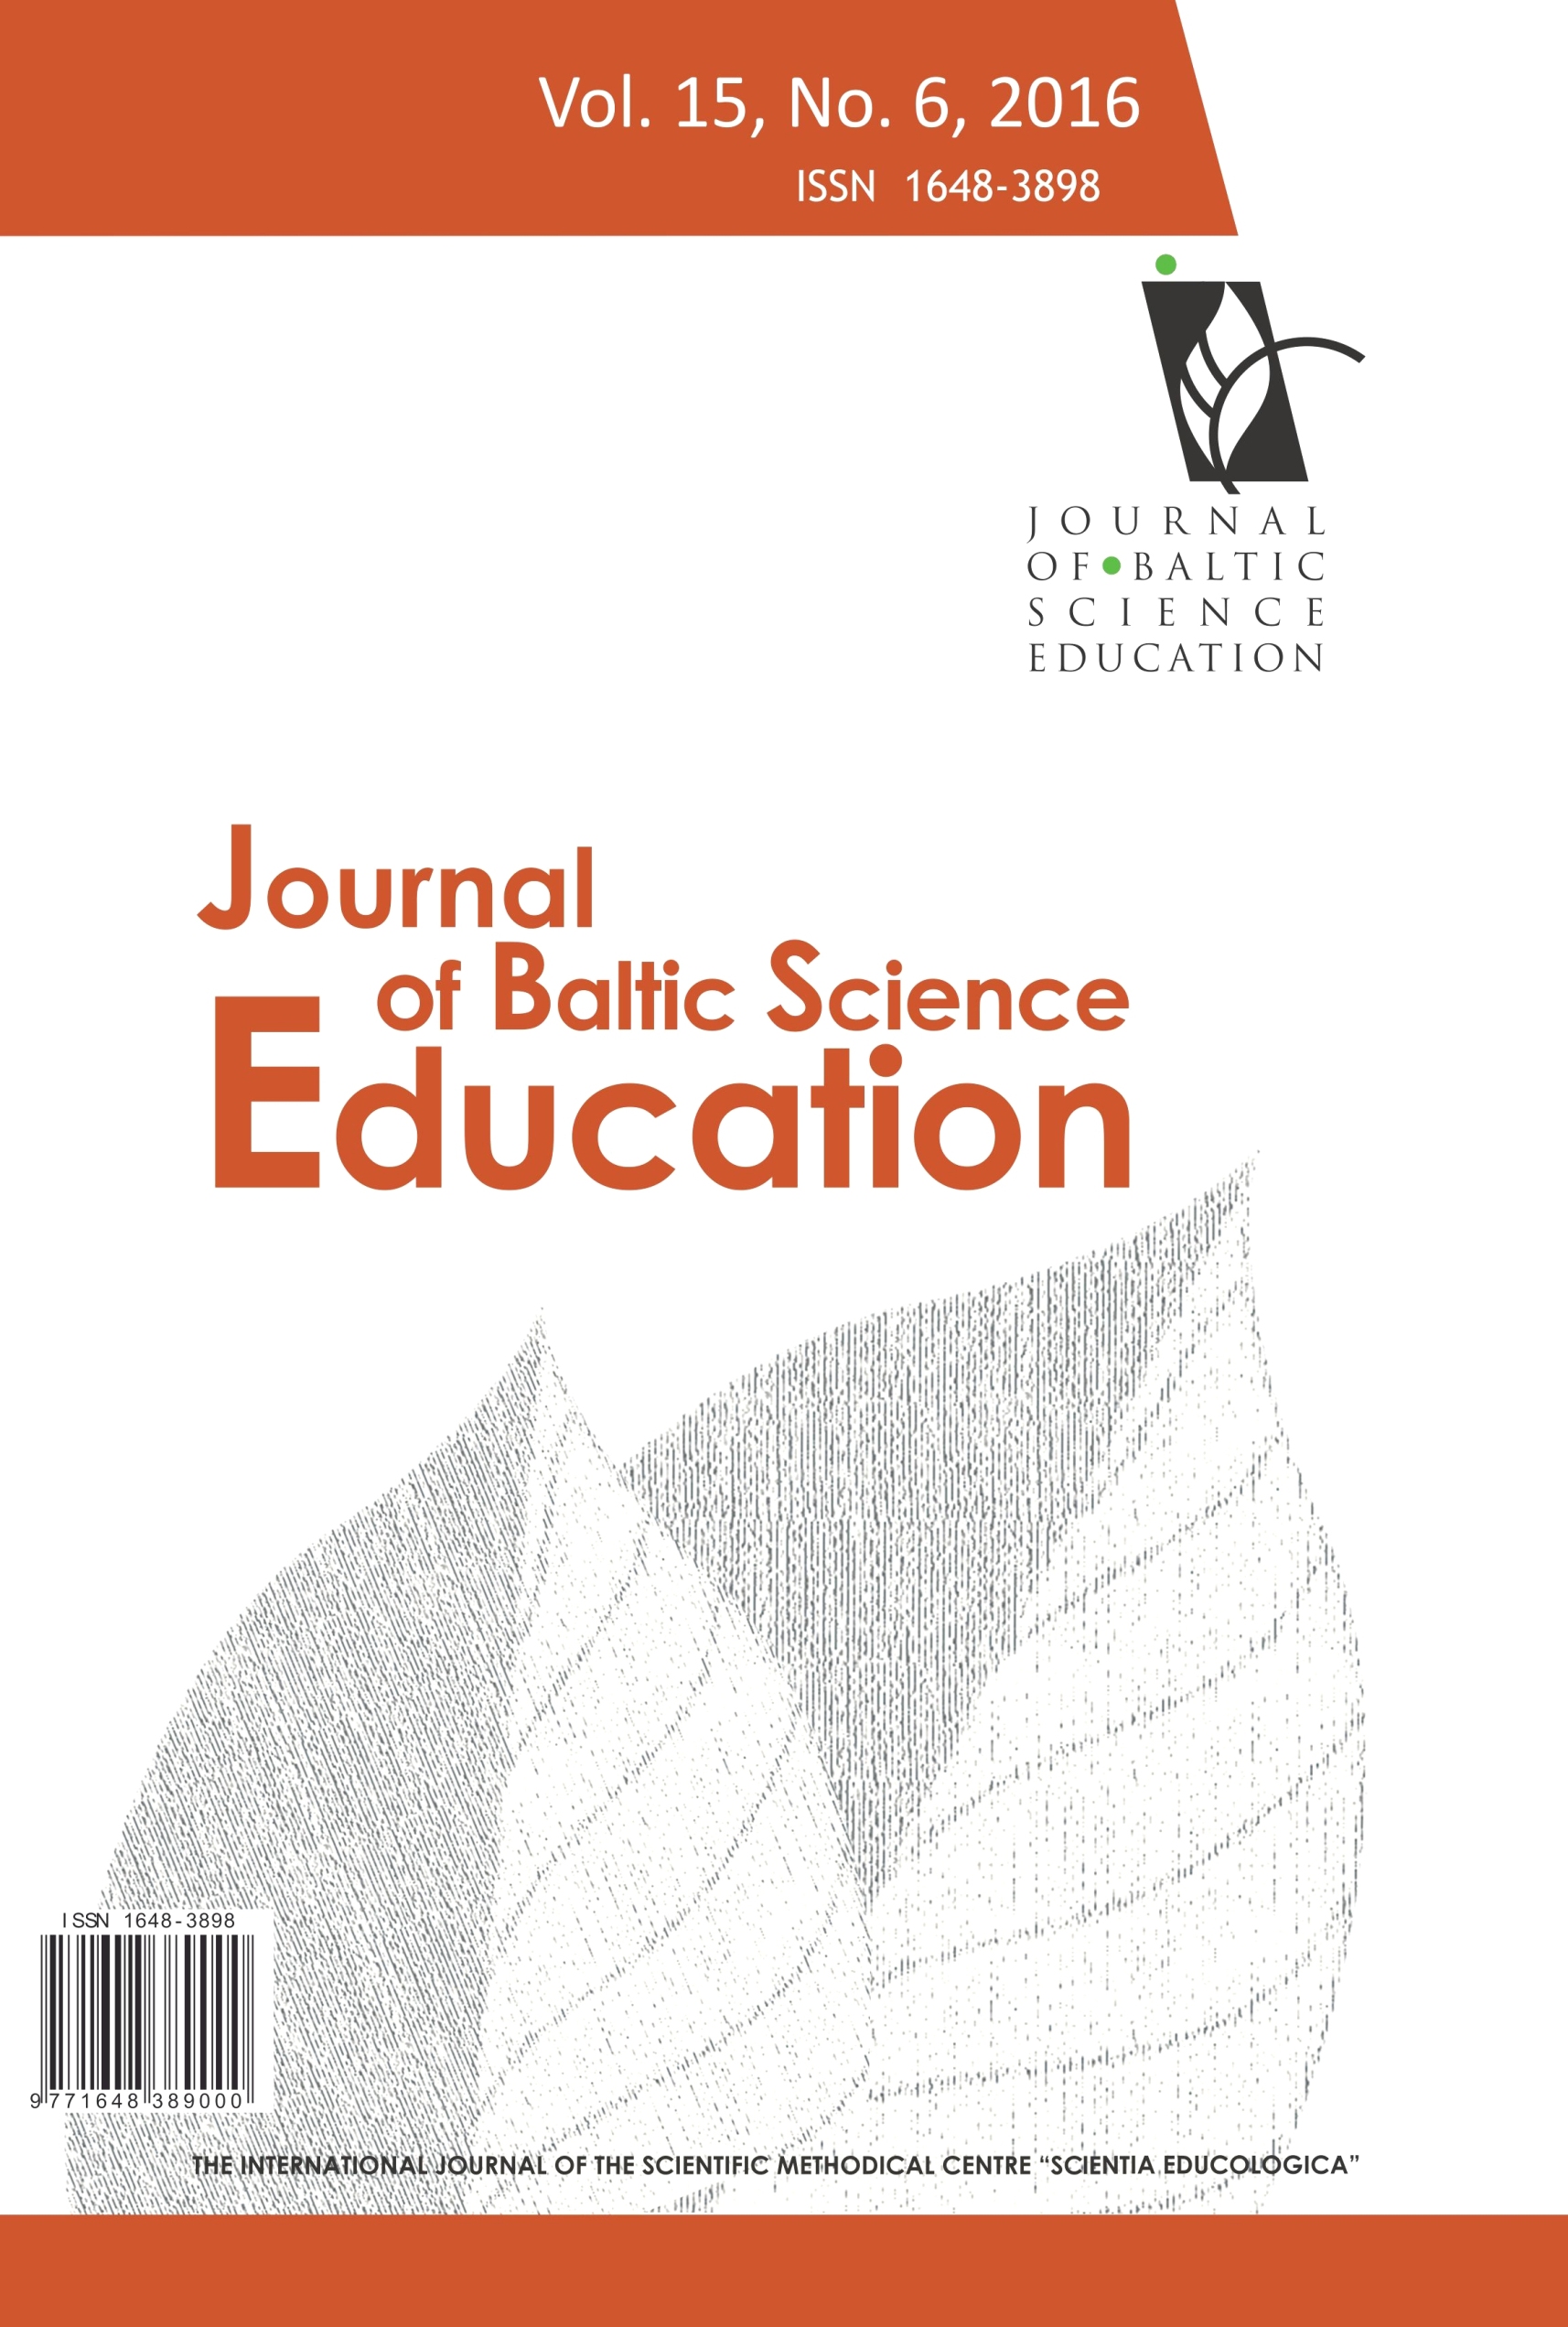 PSYCHOLOGICAL DISTANCE AND PRO-ENVIRONMENTAL BEHAVIOR: AN APPLICATION OF BEHAVIOR MODEL TO EMERGING CONTAMINANTS IN HIGHER EDUCATION